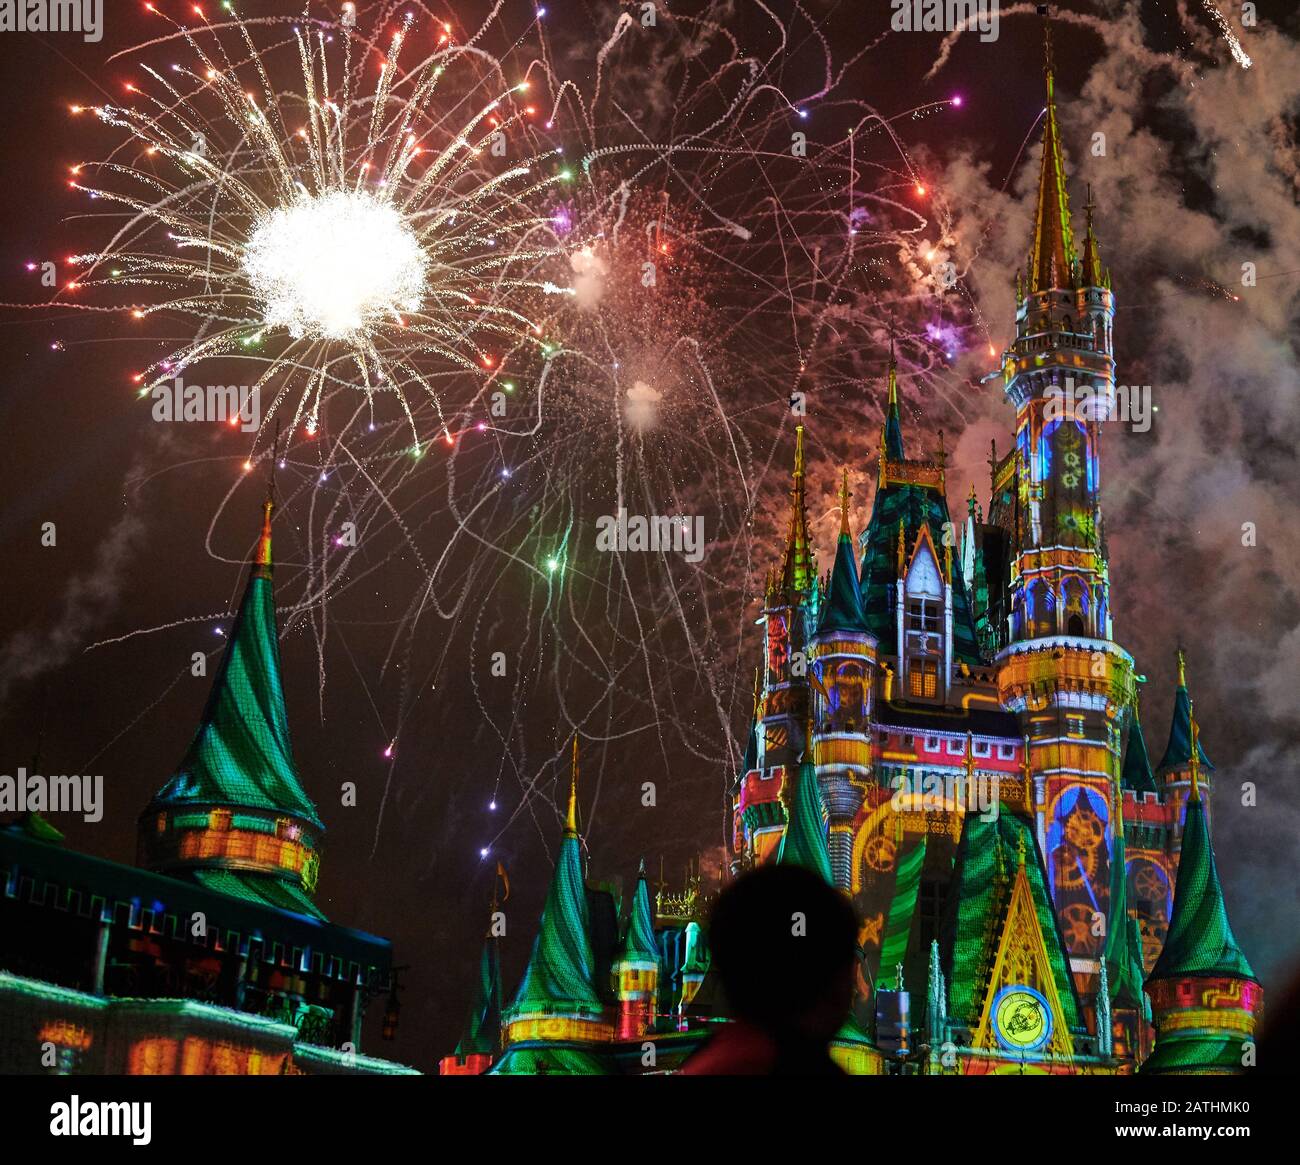 Orlando, USA - january 19, 2020: Amazing castle at disney park with colorful fireworks at night Stock Photo